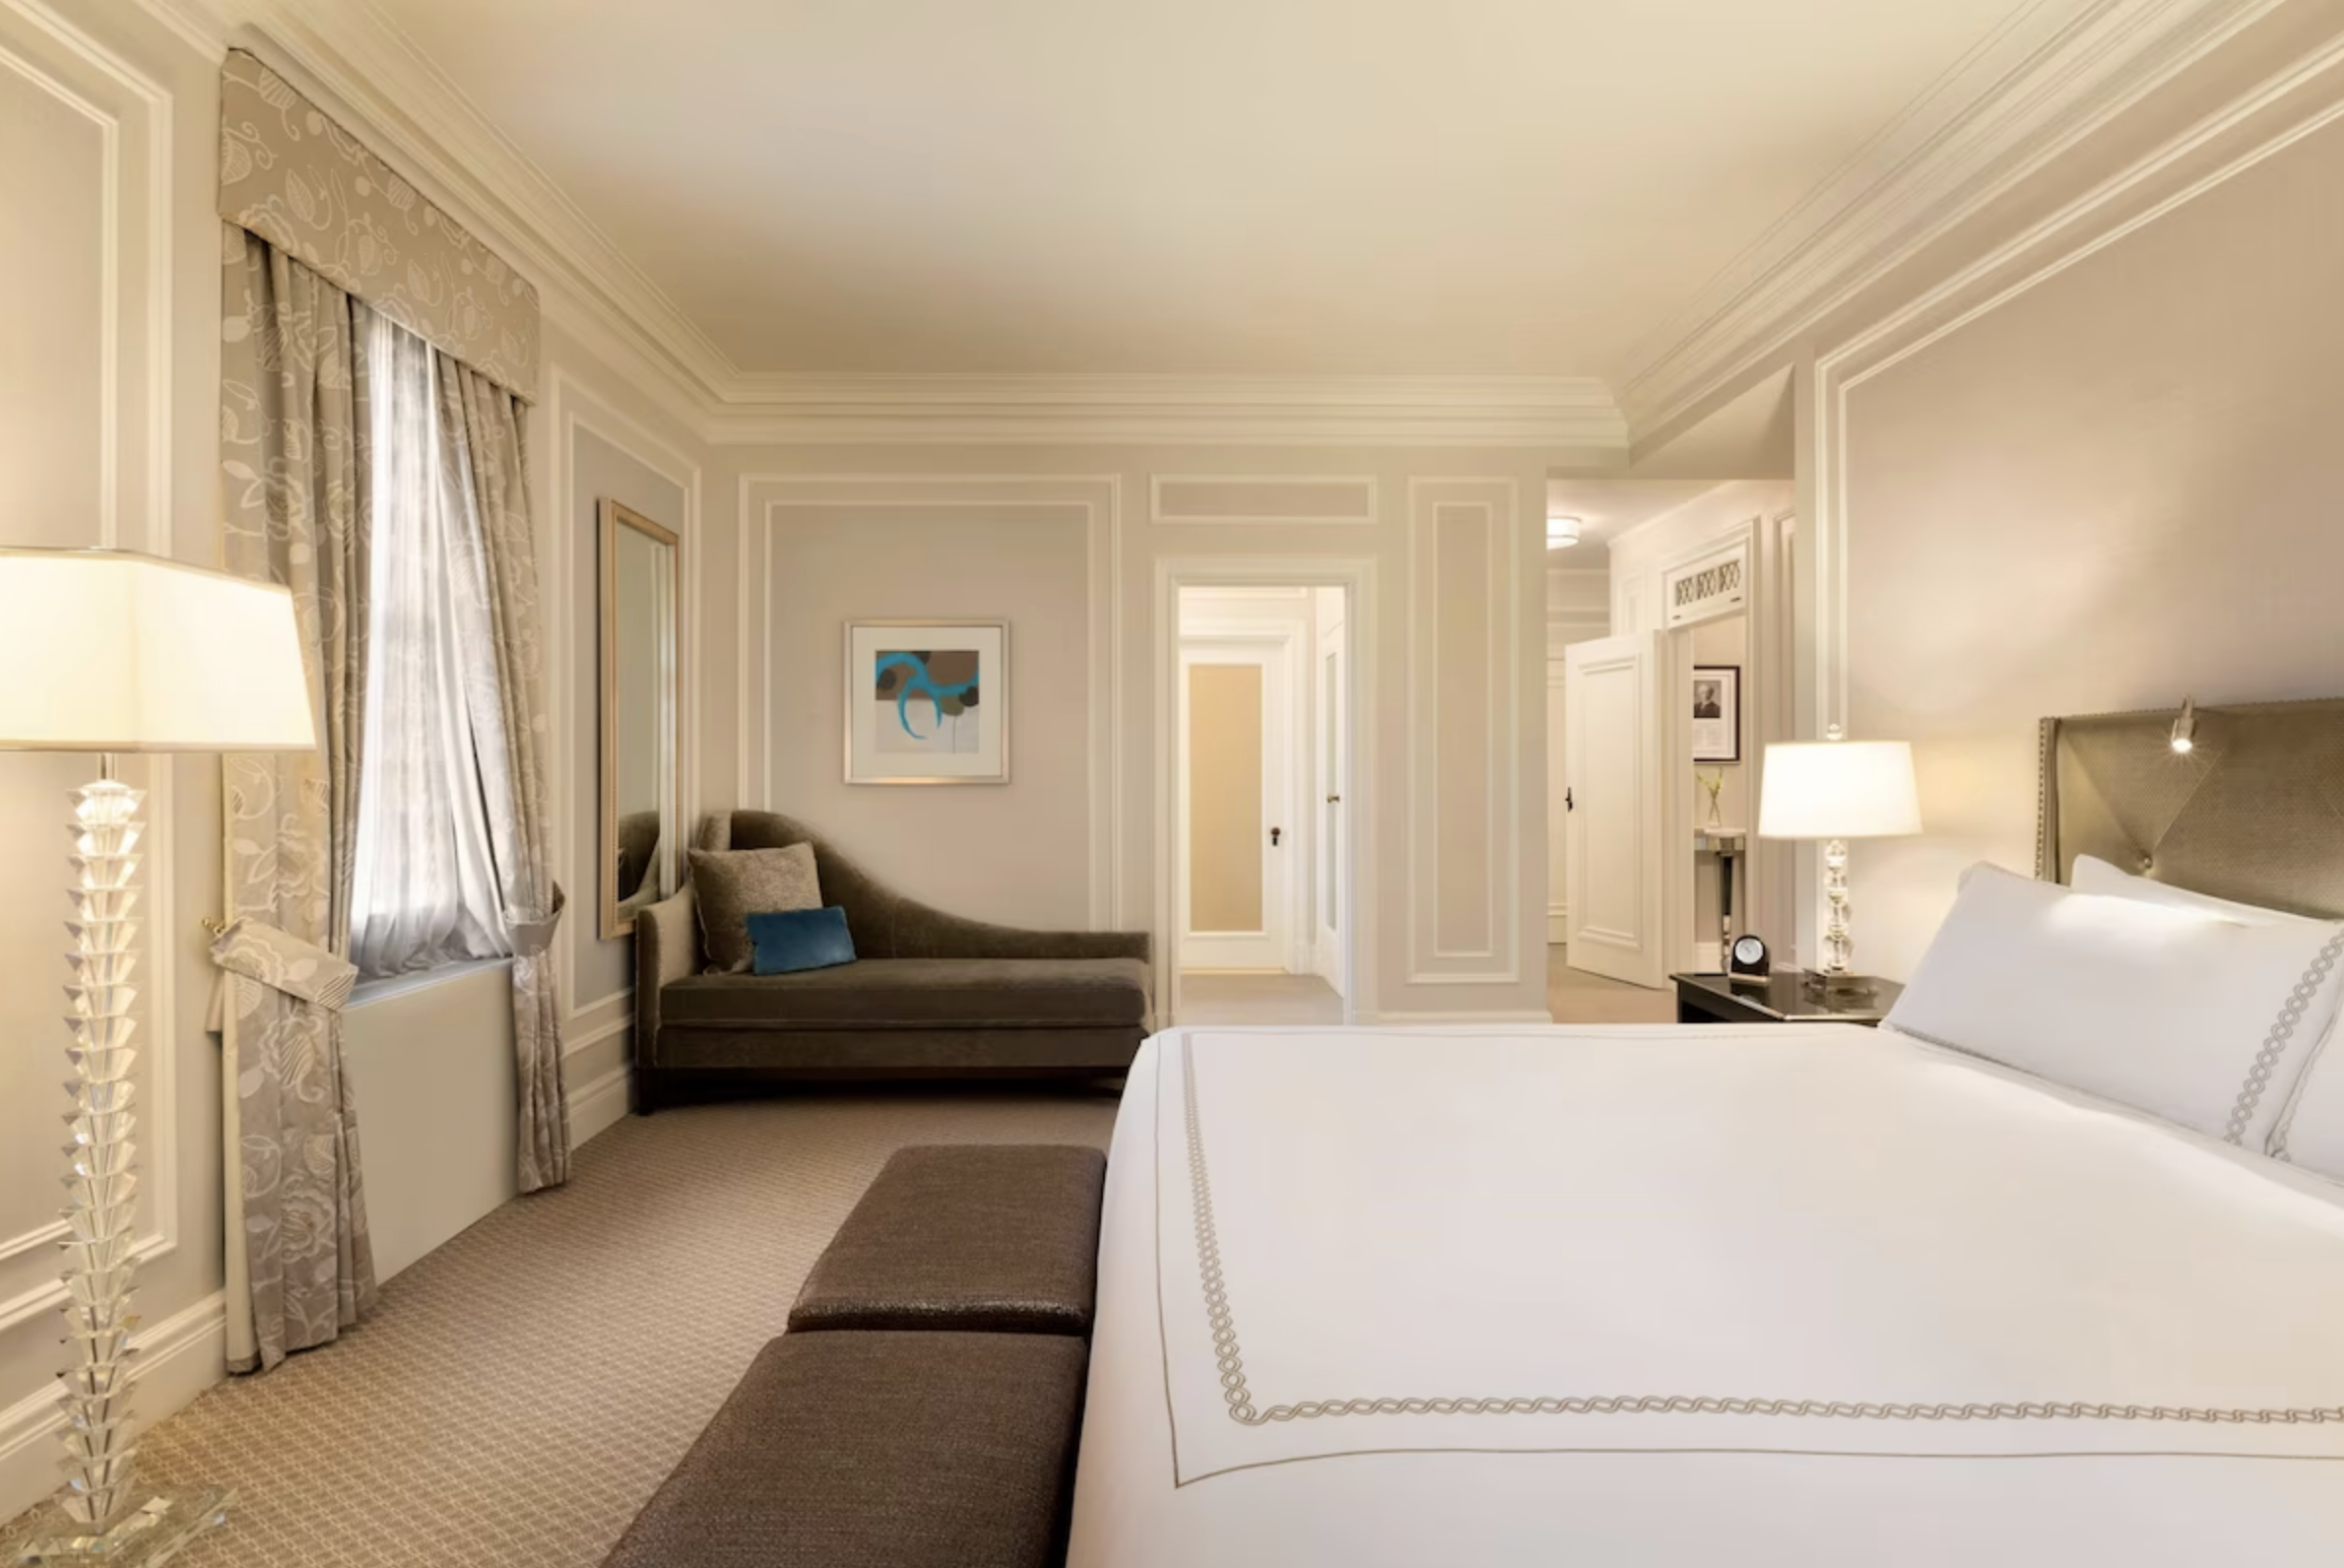 13. Fairmont Chateau Laurier - Premium bedding, pillowtop beds, minibar, in-room safe